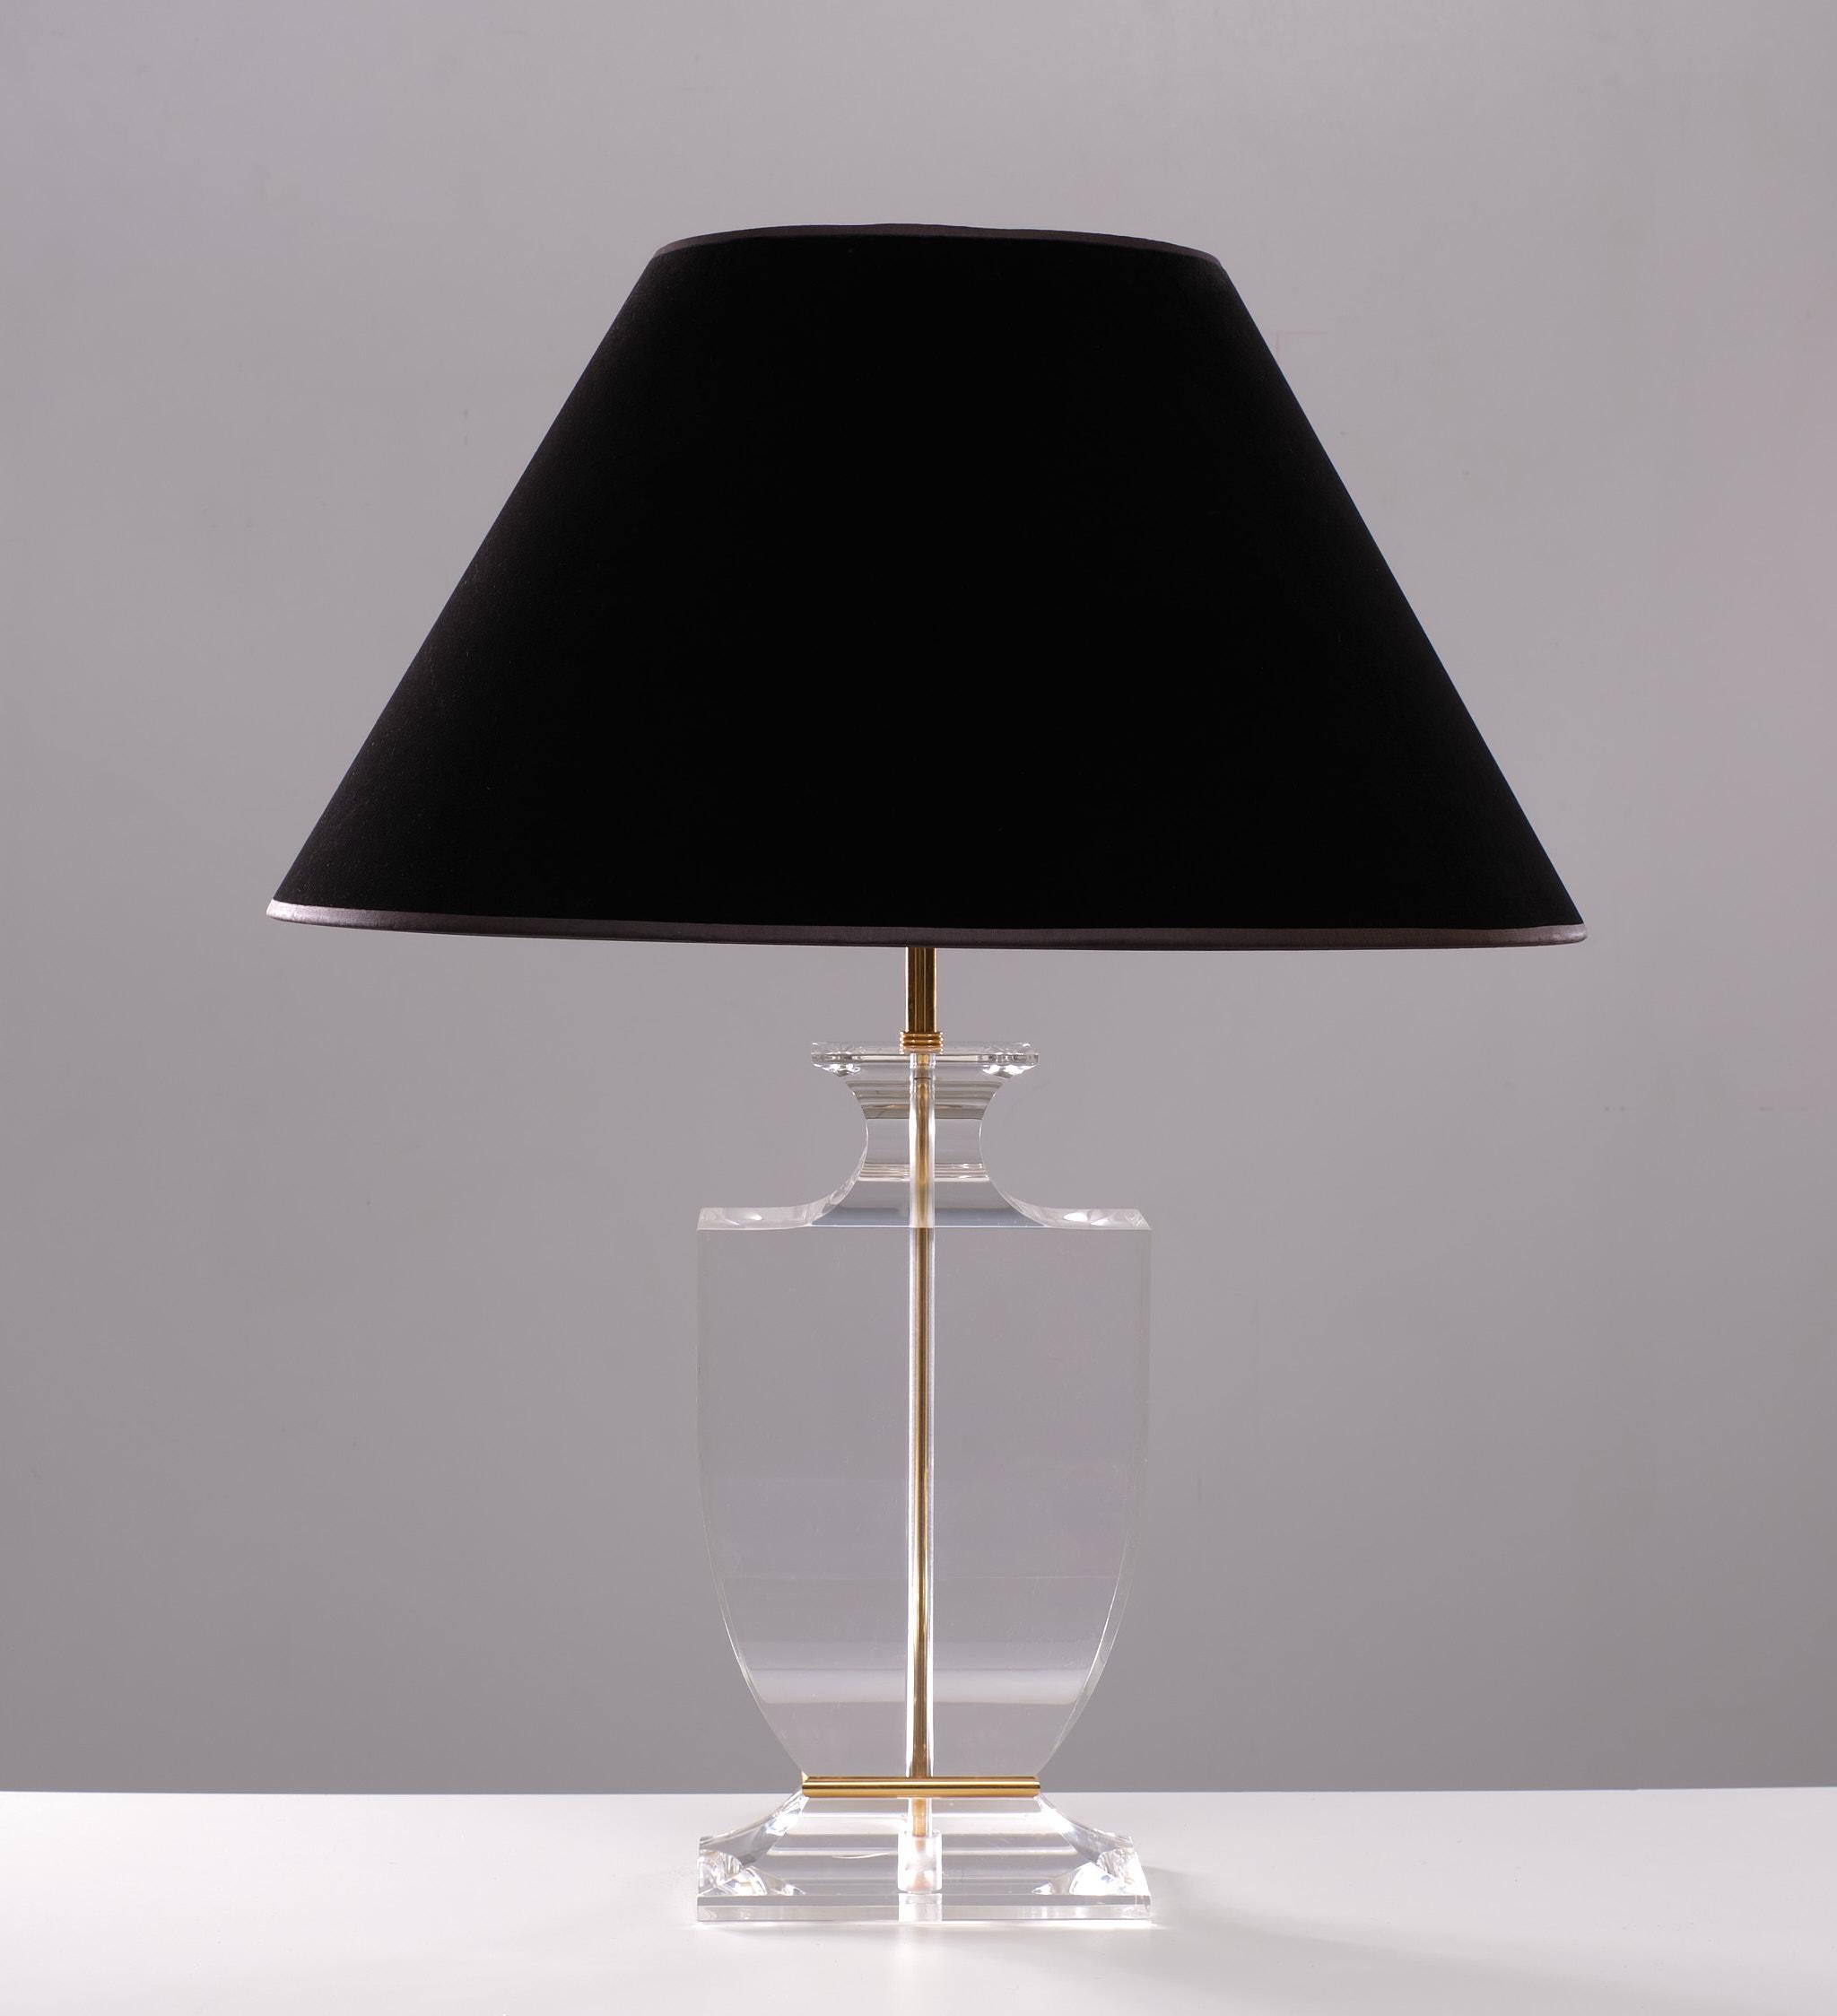 Superb table lamp. Thick top quality Lucite, comes with Gold plated details. 
Complete with a black Velvet shade. One large E27 bulb needed.
Hollywood Regency style. France, 1970s.